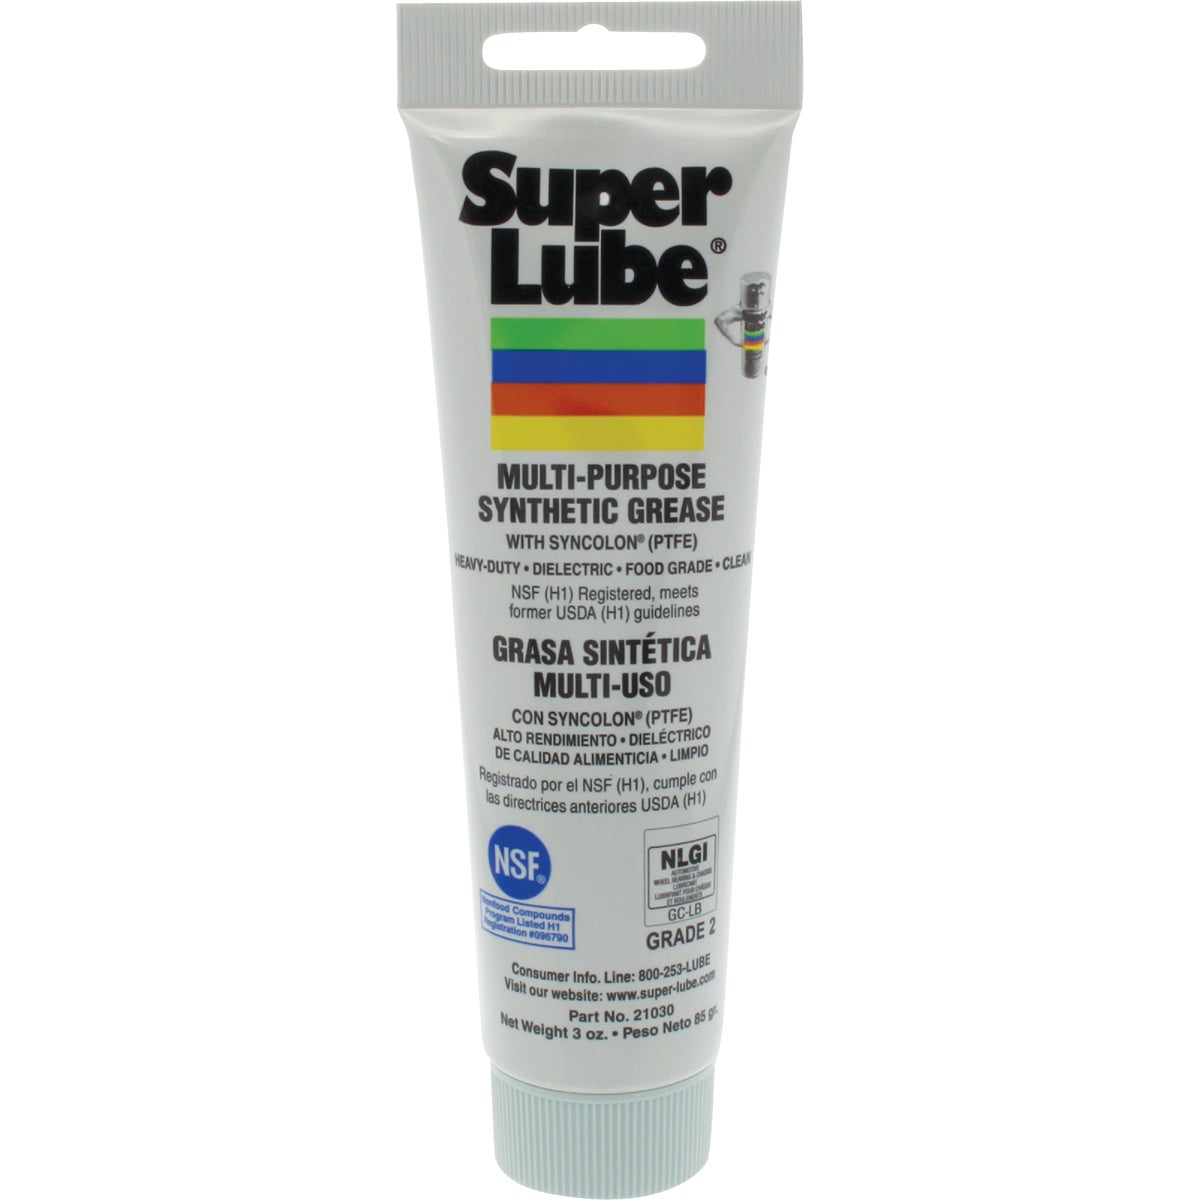 Item 574007, Super Lube synthetic NLGI Grade 2 heavy-duty, multipurpose lubricant with 